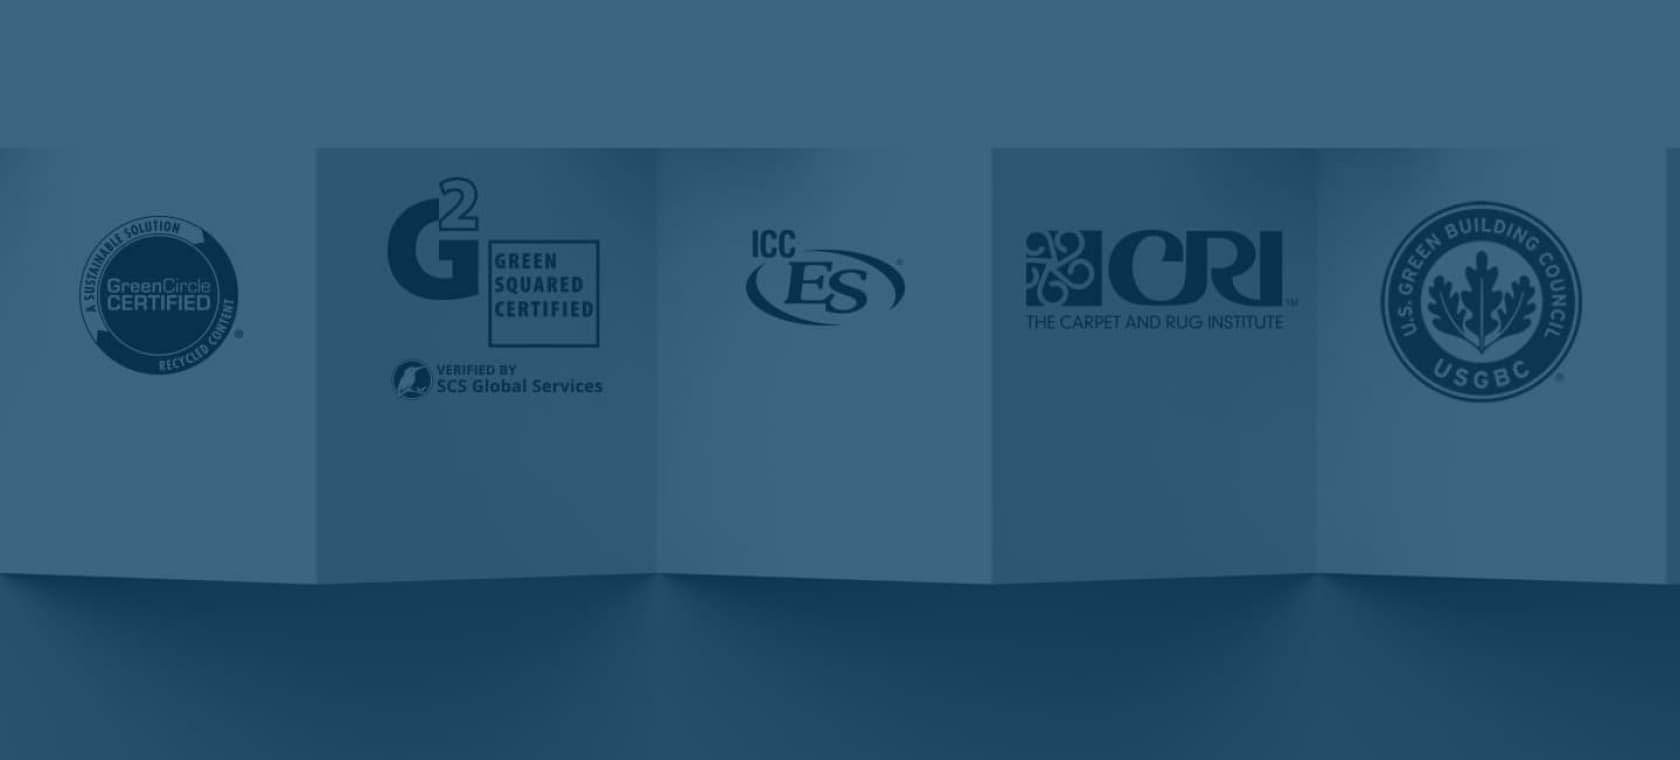 iso-certifications-banner